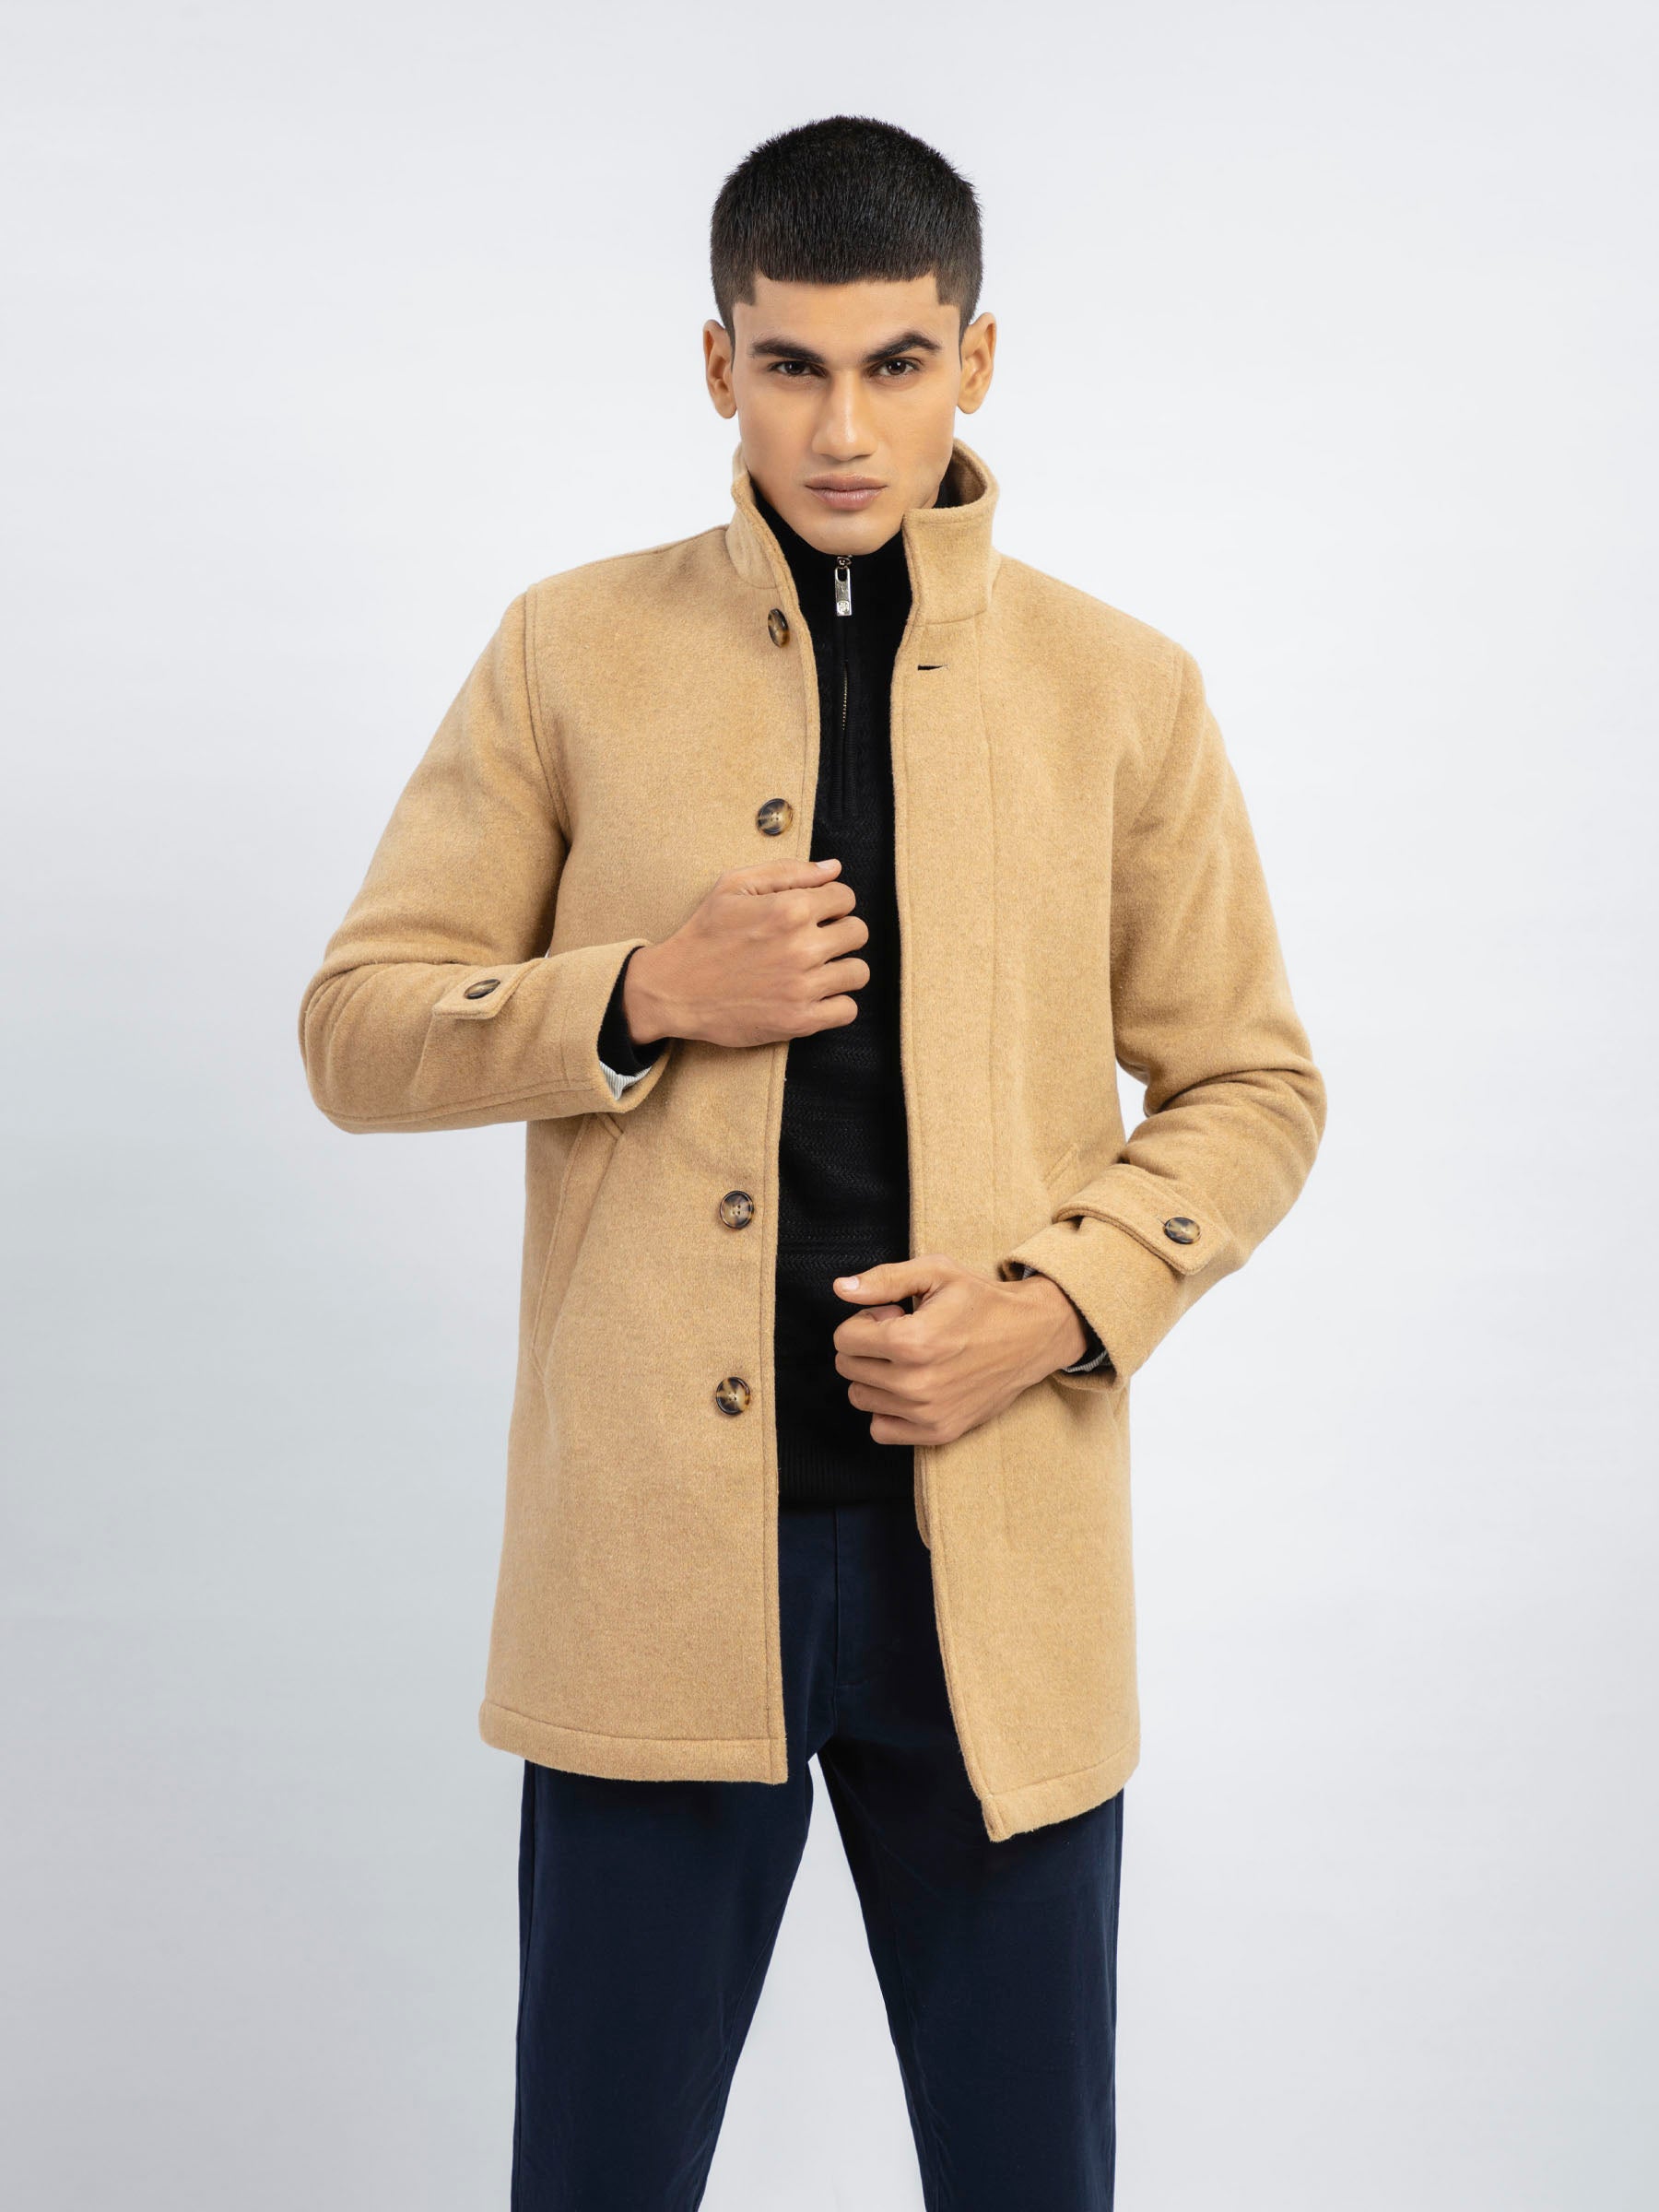 Camel Wool Blended Long Coat - Limited Edition